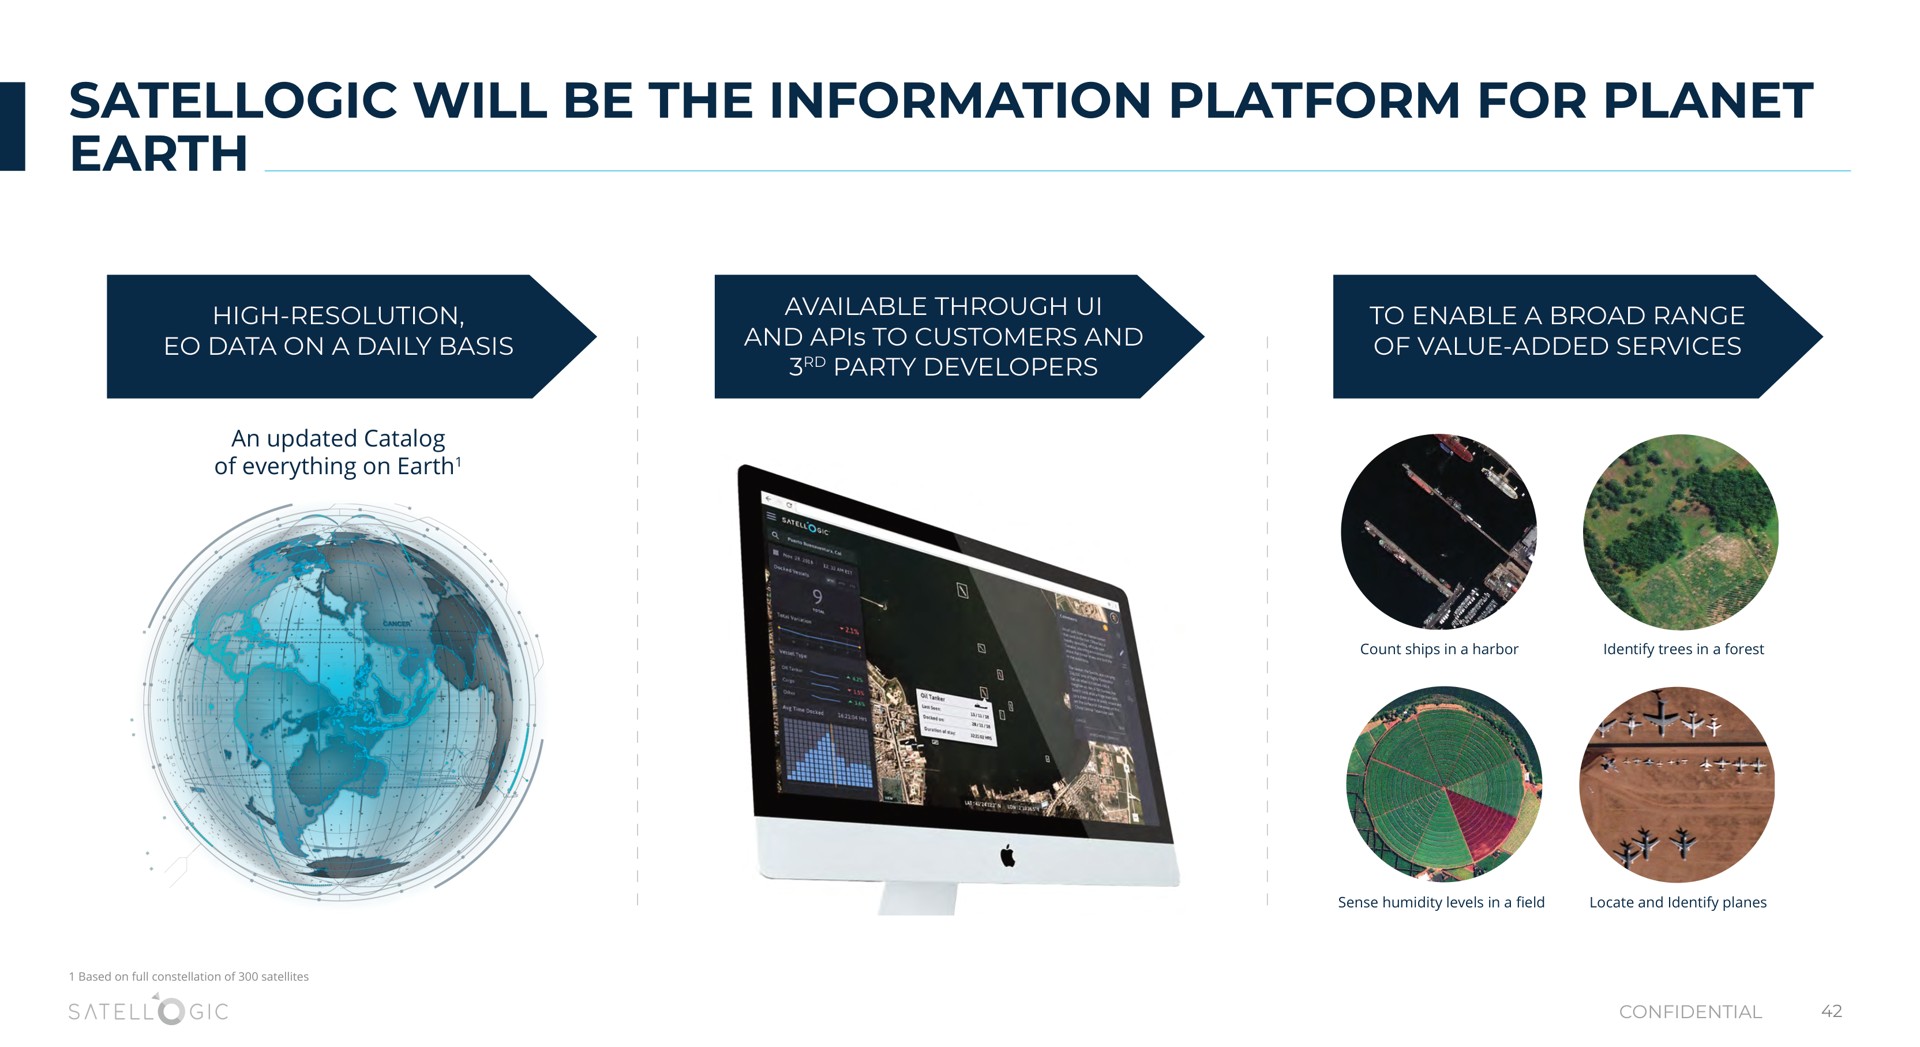 will be the information platform for planet earth | Satellogic